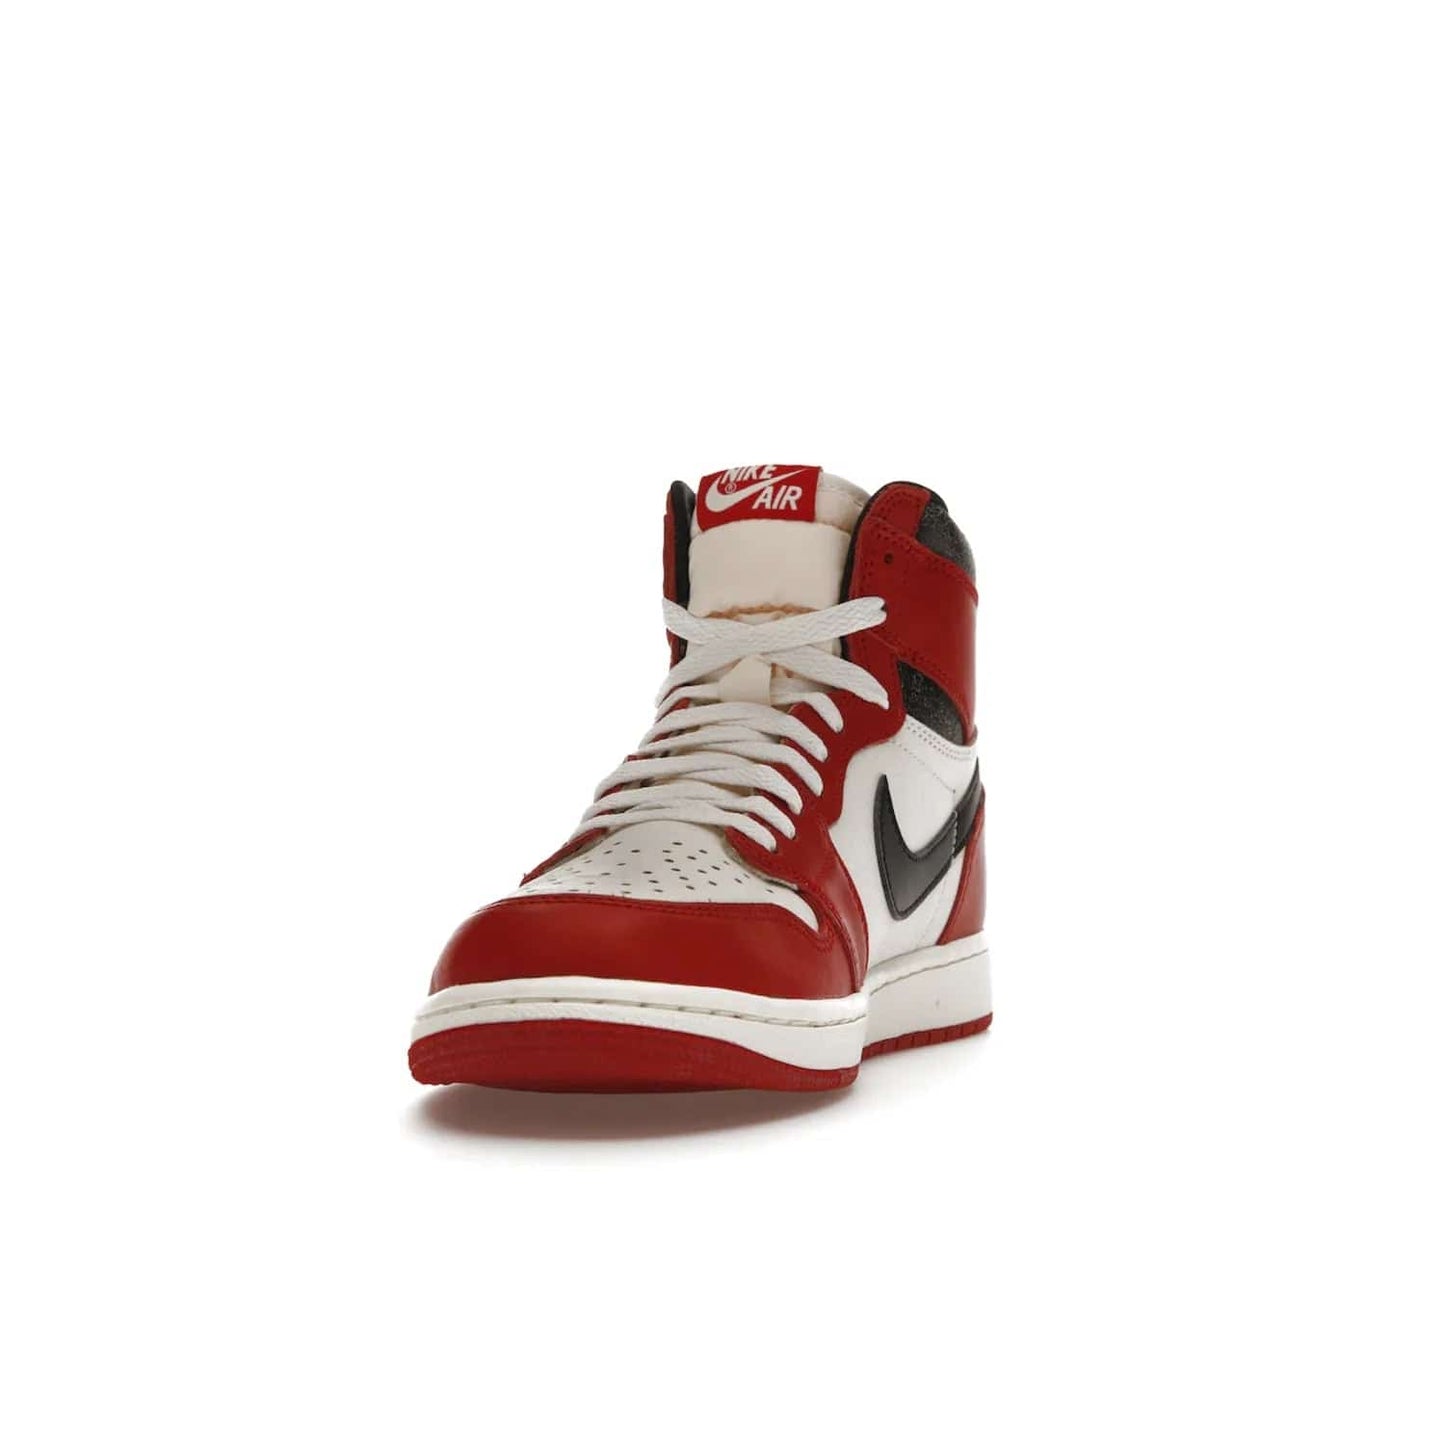 Jordan 1 Retro High OG Chicago Lost and Found - Image 12 - Only at www.BallersClubKickz.com - Be the envy of all sneakerheads with the Air Jordan 1 Retro High OG “Chicago Lost and Found”. This special edition shoe comes in a Varsity Red/Black-Sail-Muslin colorway and features crackled leather uppers and yellowed details for a unique, vintage look. Get your hands this rare release in November 2022.